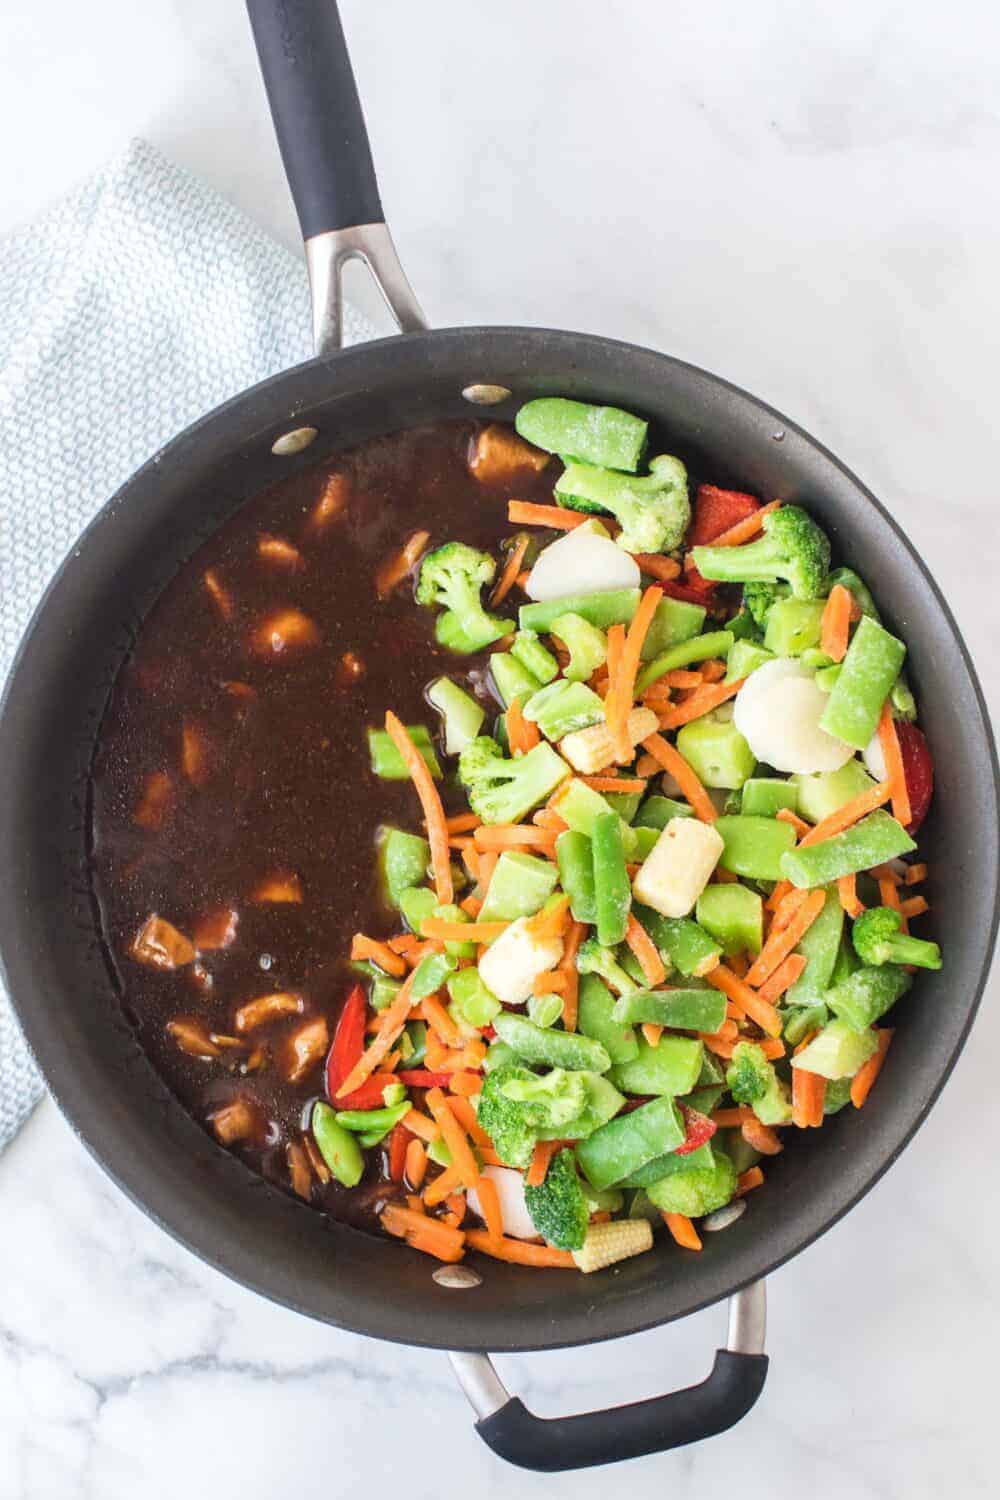 stir fried sticky saucy chicken and veggies in a pan top view